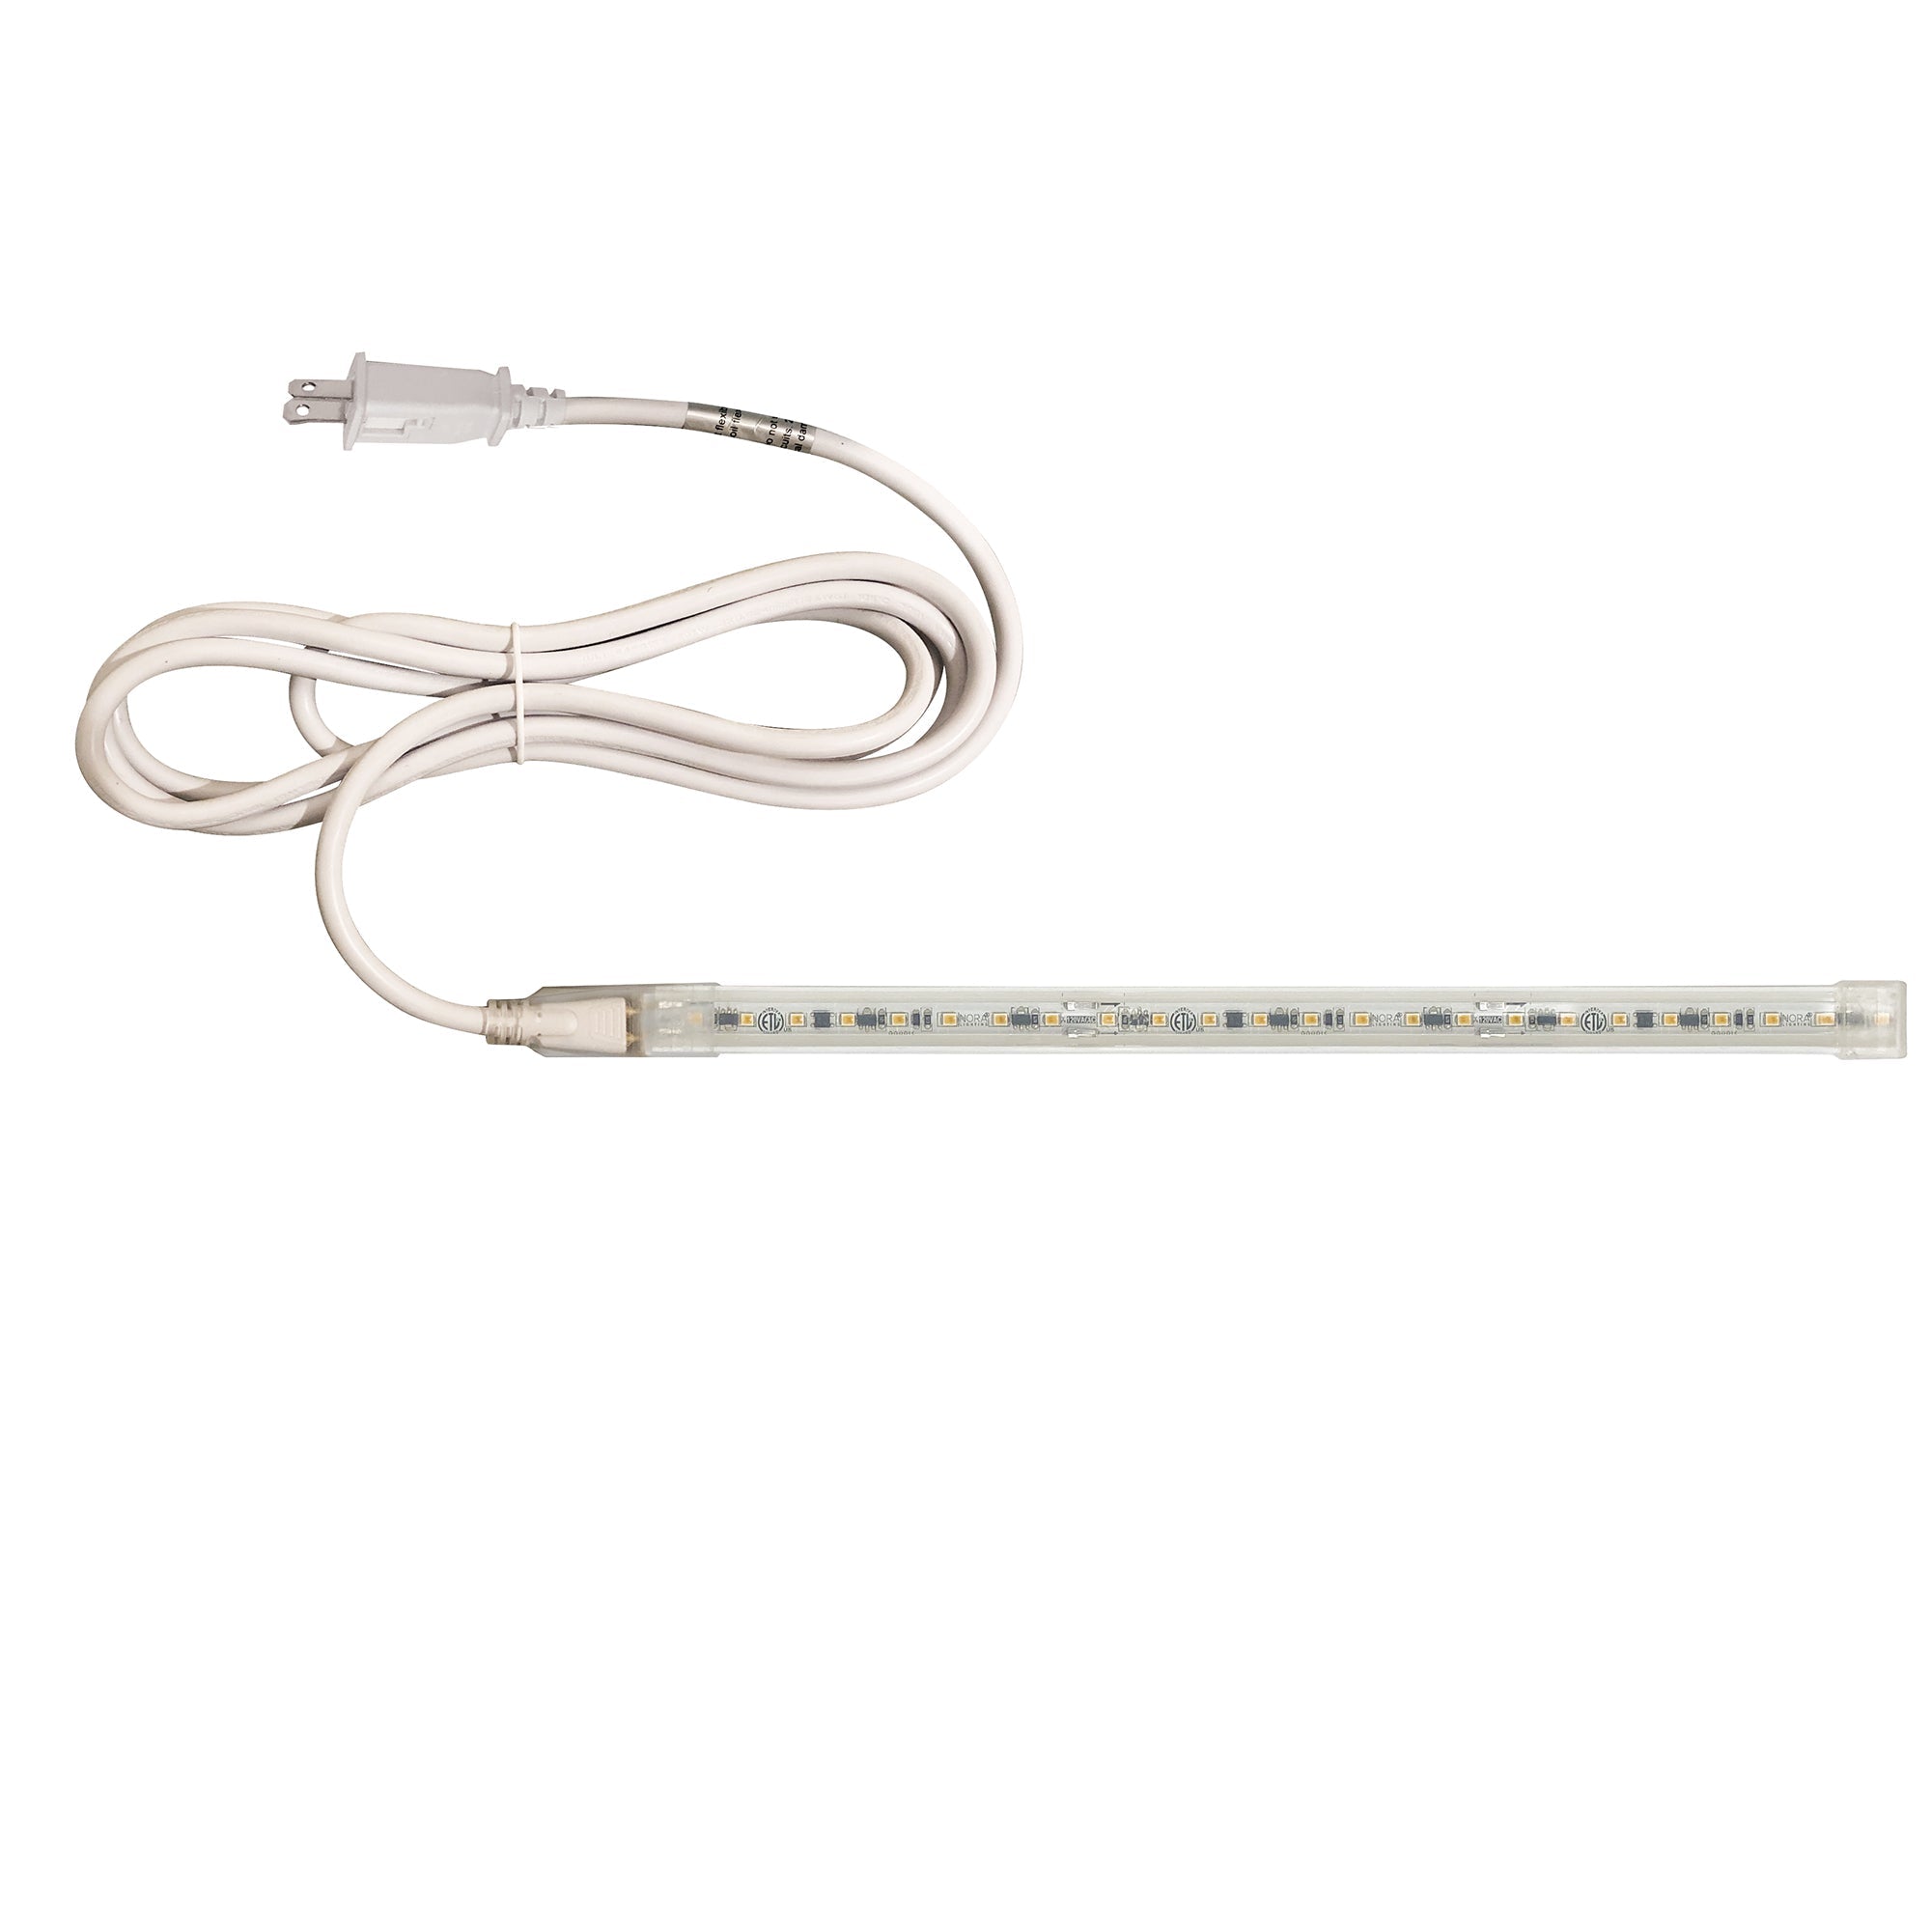 Nora Lighting NUTP13-W66-12-930/CP - Accent / Undercabinet - Custom Cut 66-ft 120V Continuous LED Tape Light, 330lm / 3.6W per foot, 3000K, w/ Mounting Clips and 8' Cord & Plug